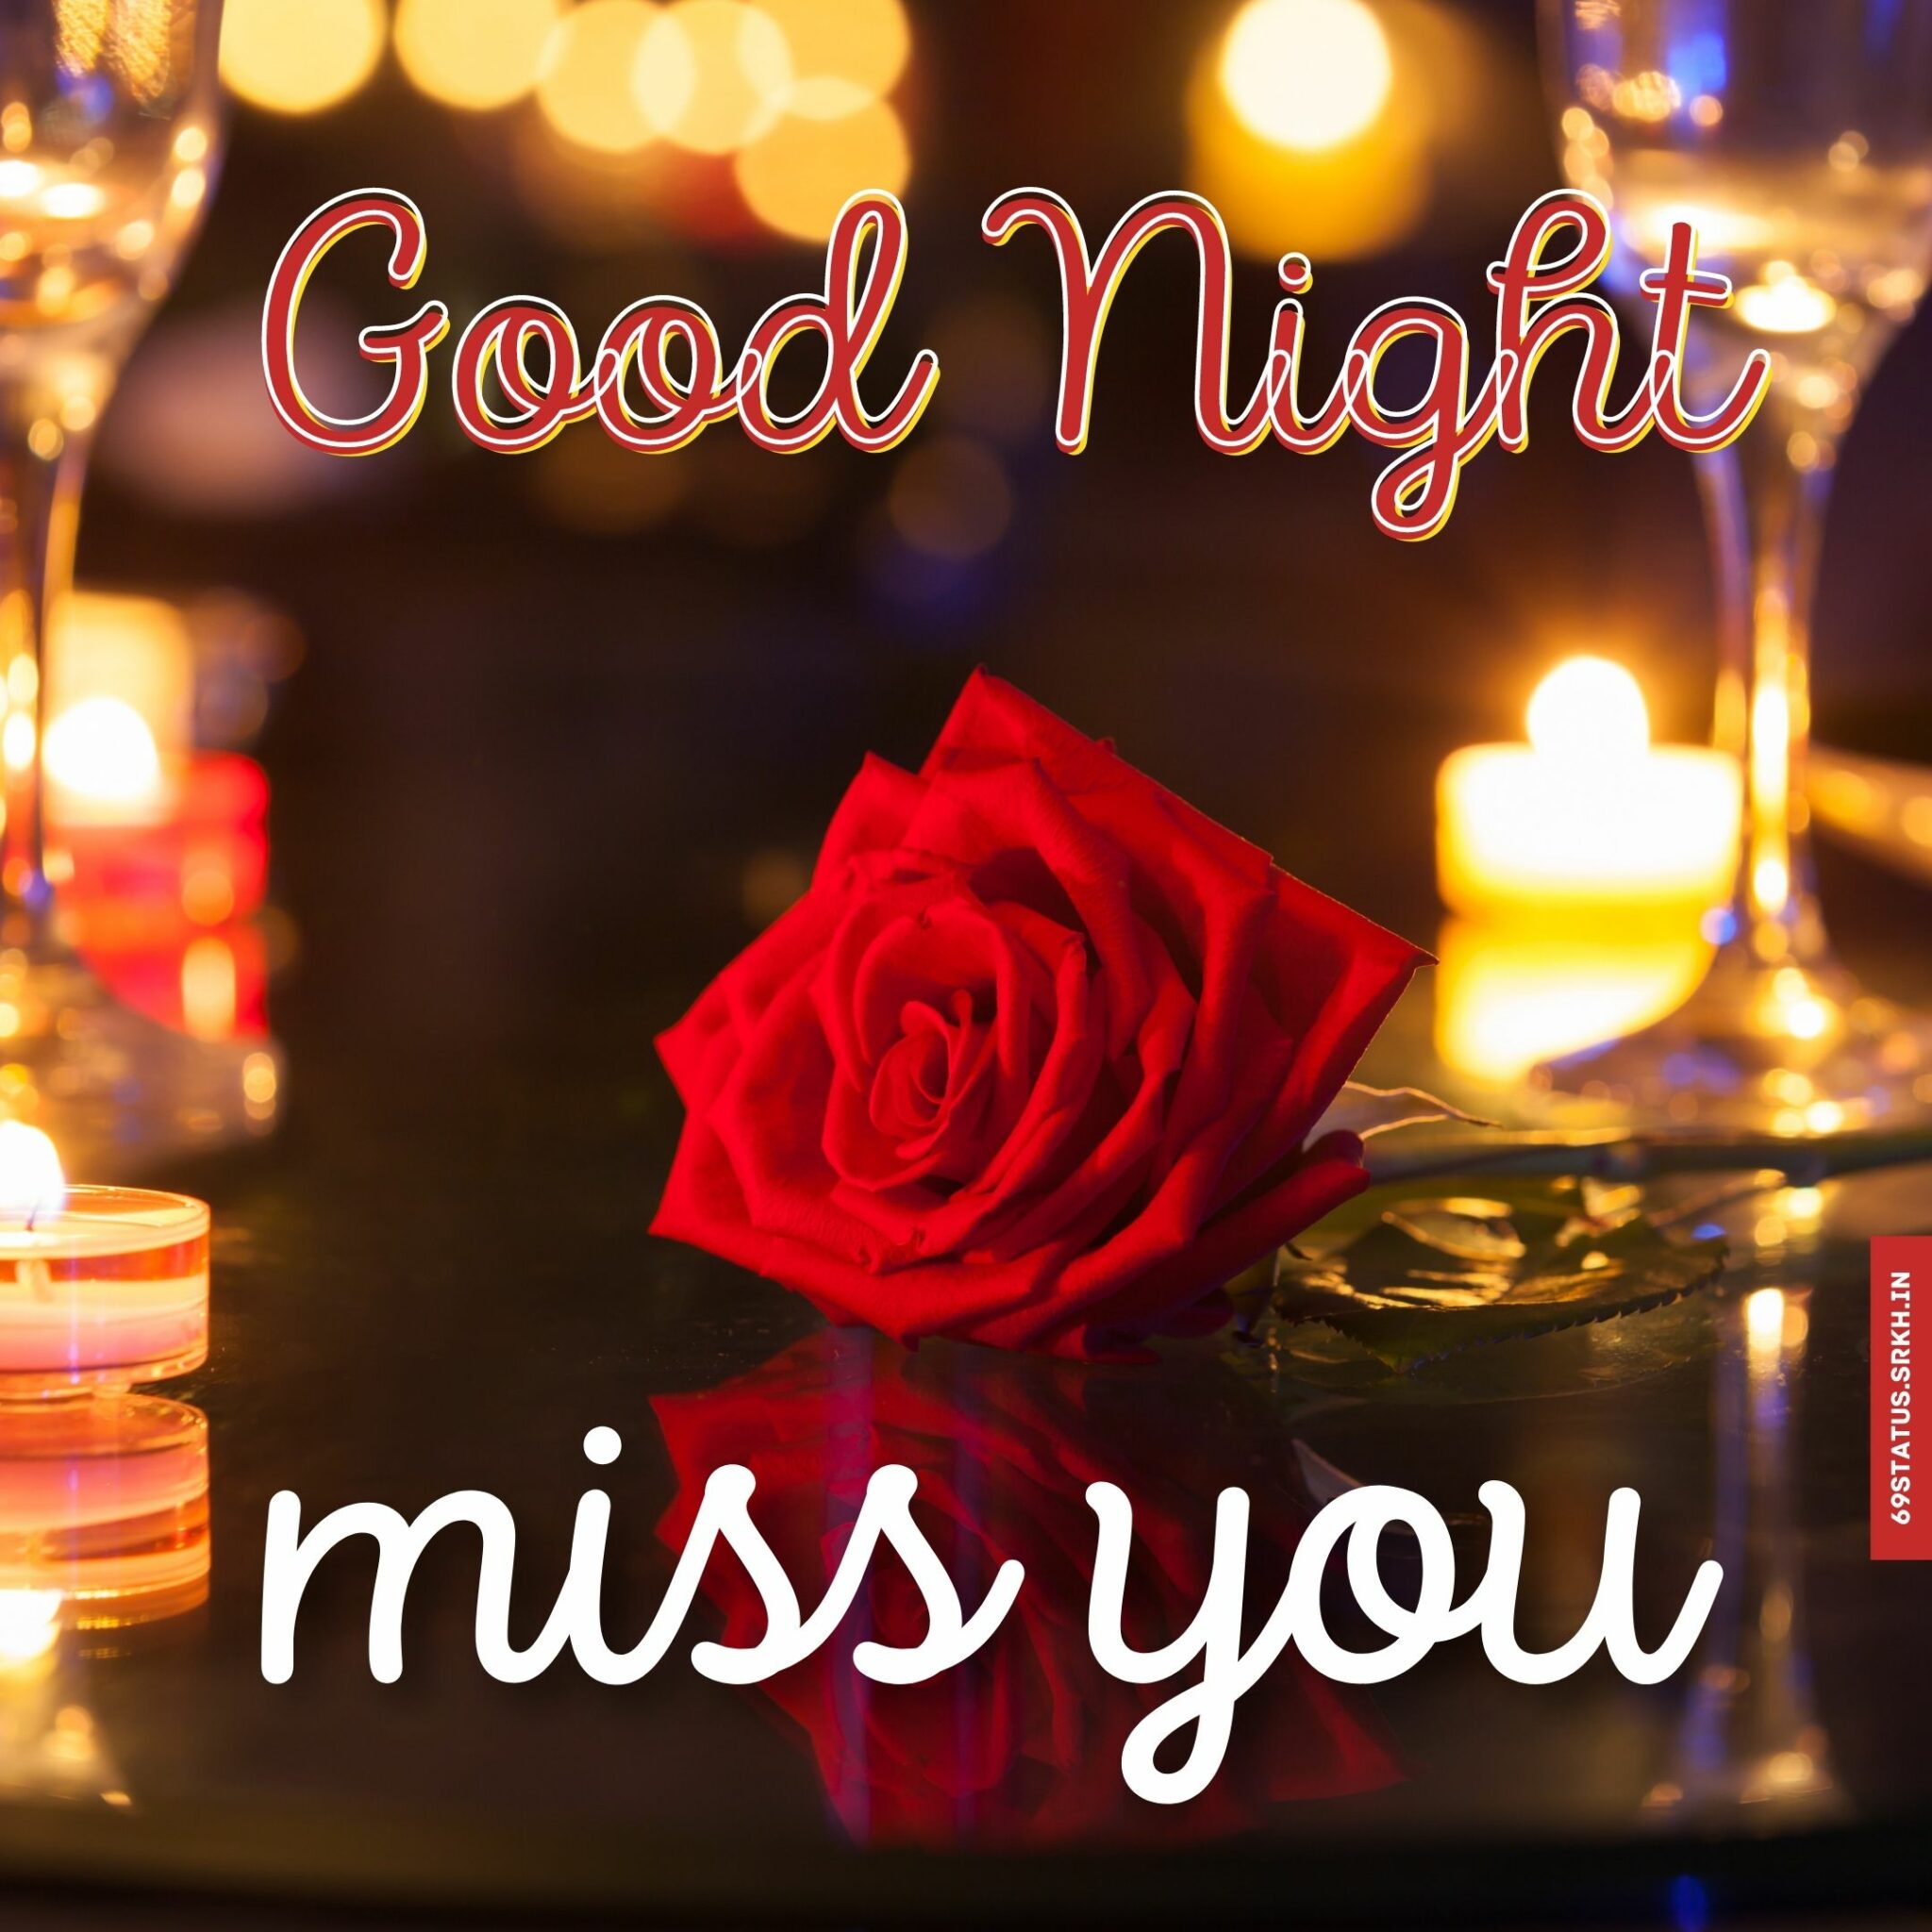 Good night miss you images